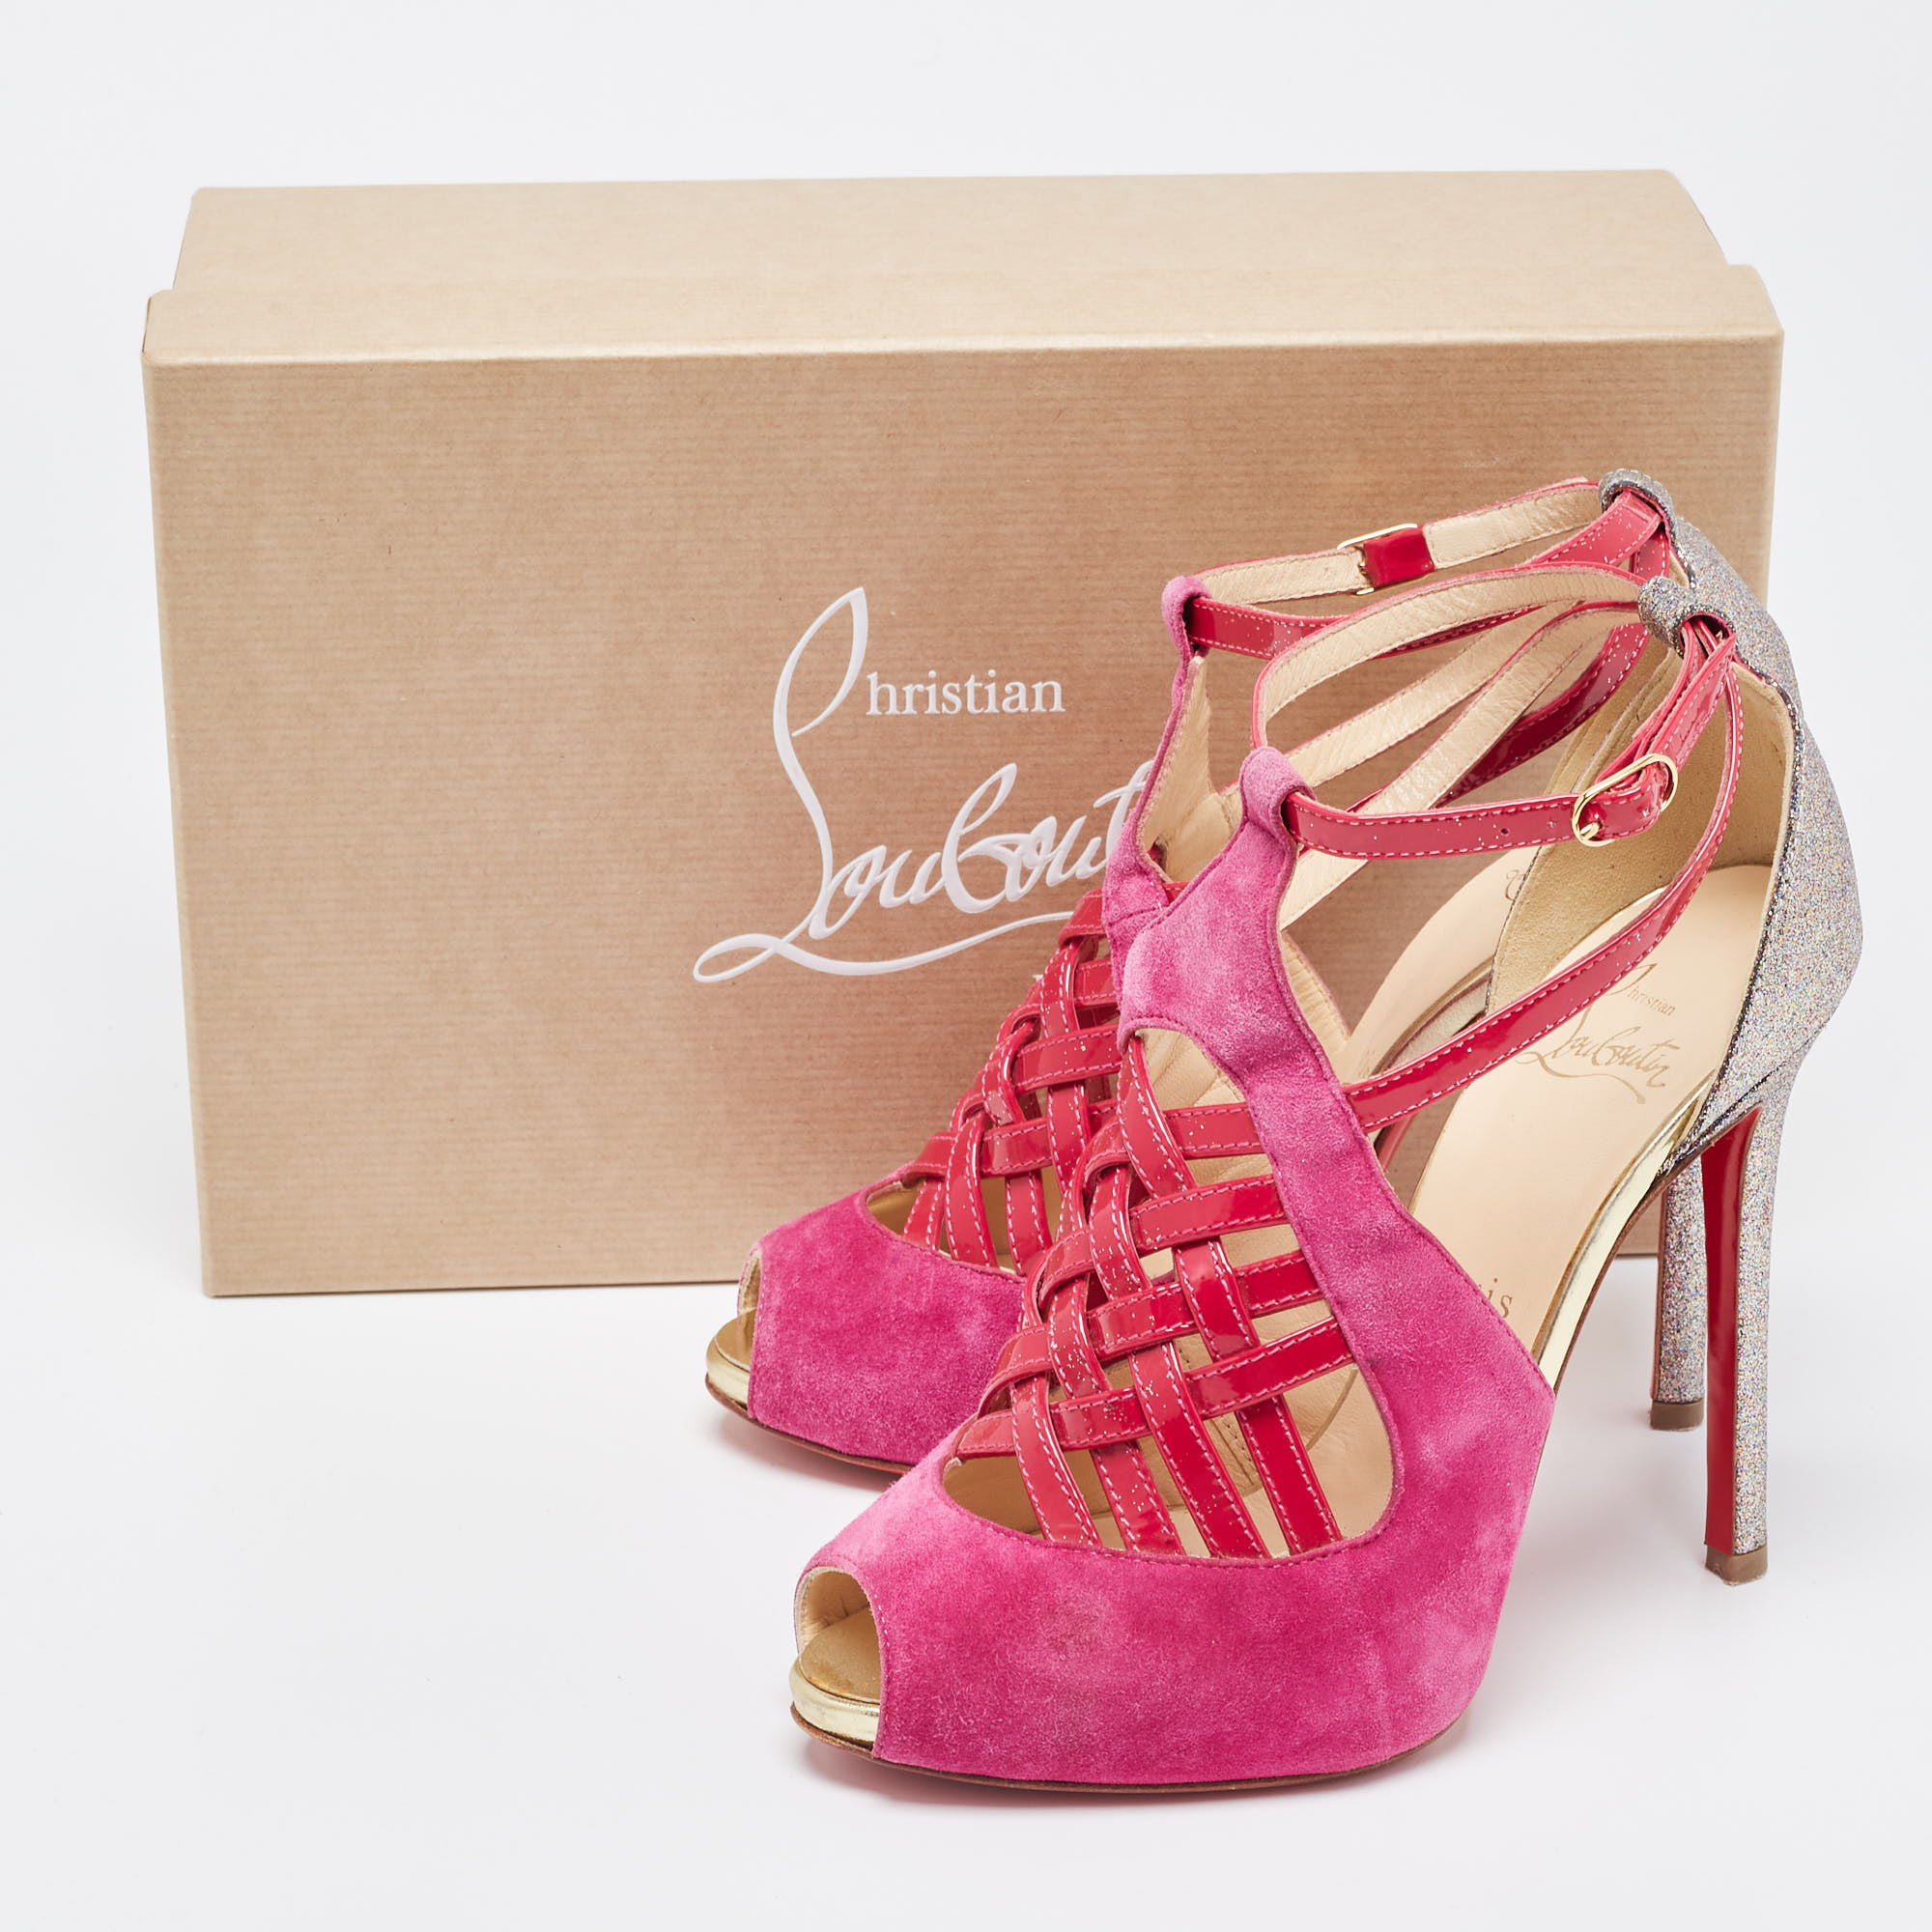 Christian Louboutin Pink/Metallic Bronze Suede And Leather Ankle Strap Sandals Size 37